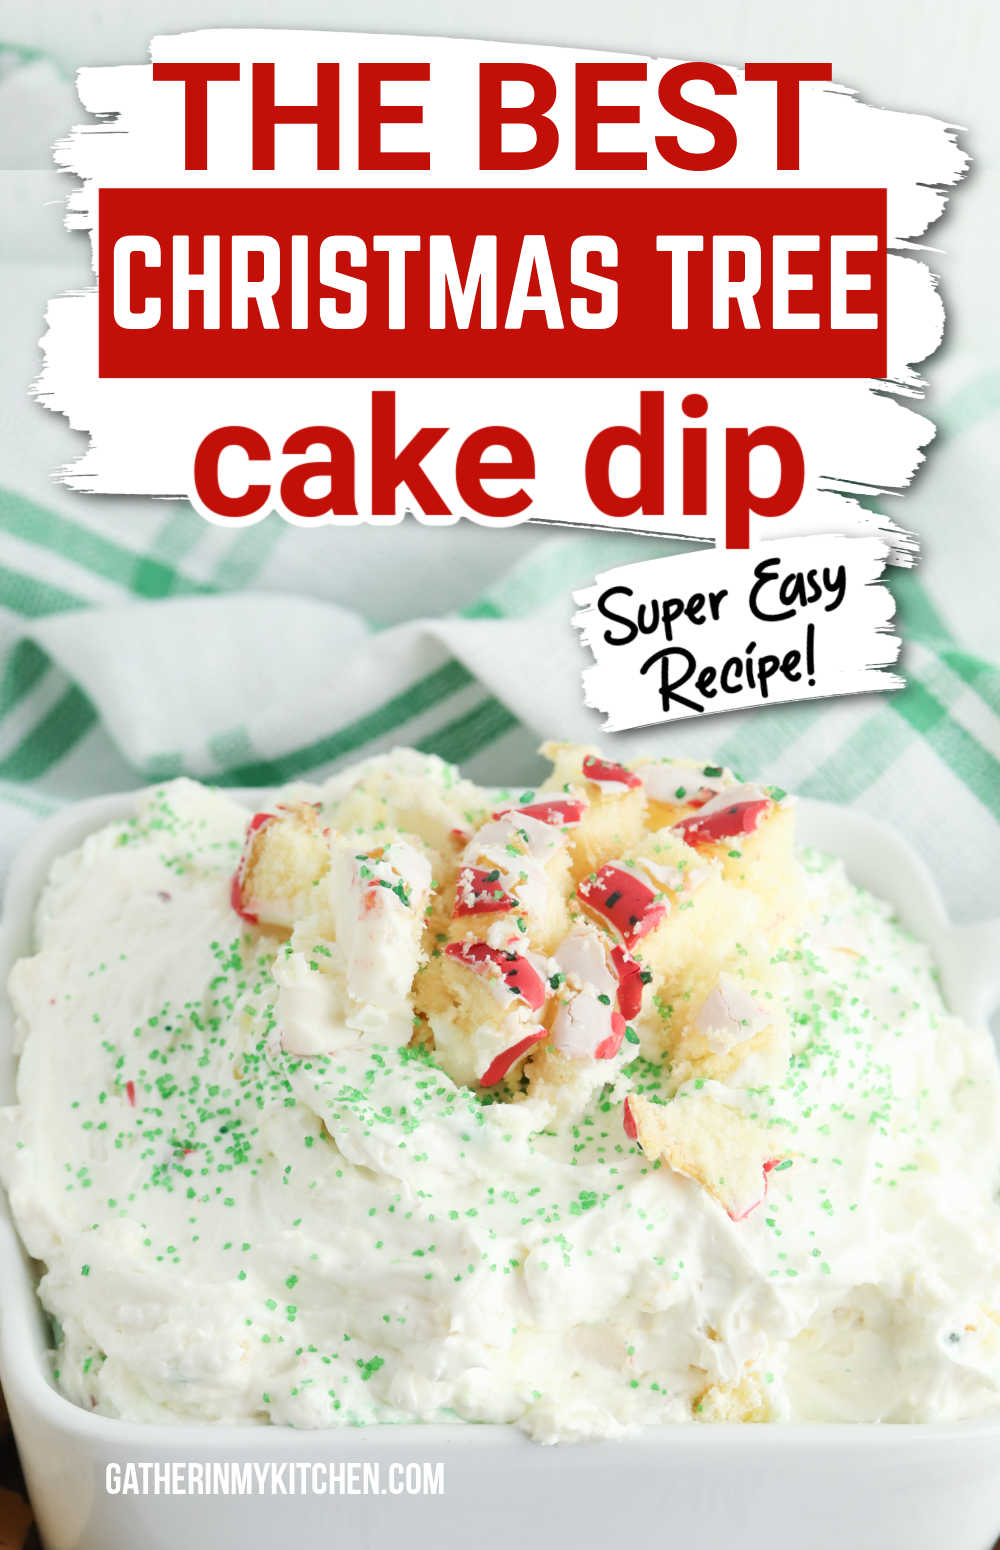 Pin image: top says "The Best Christmas Tree cake dip: super easy recipe" and bottom has a closeup of the dip.